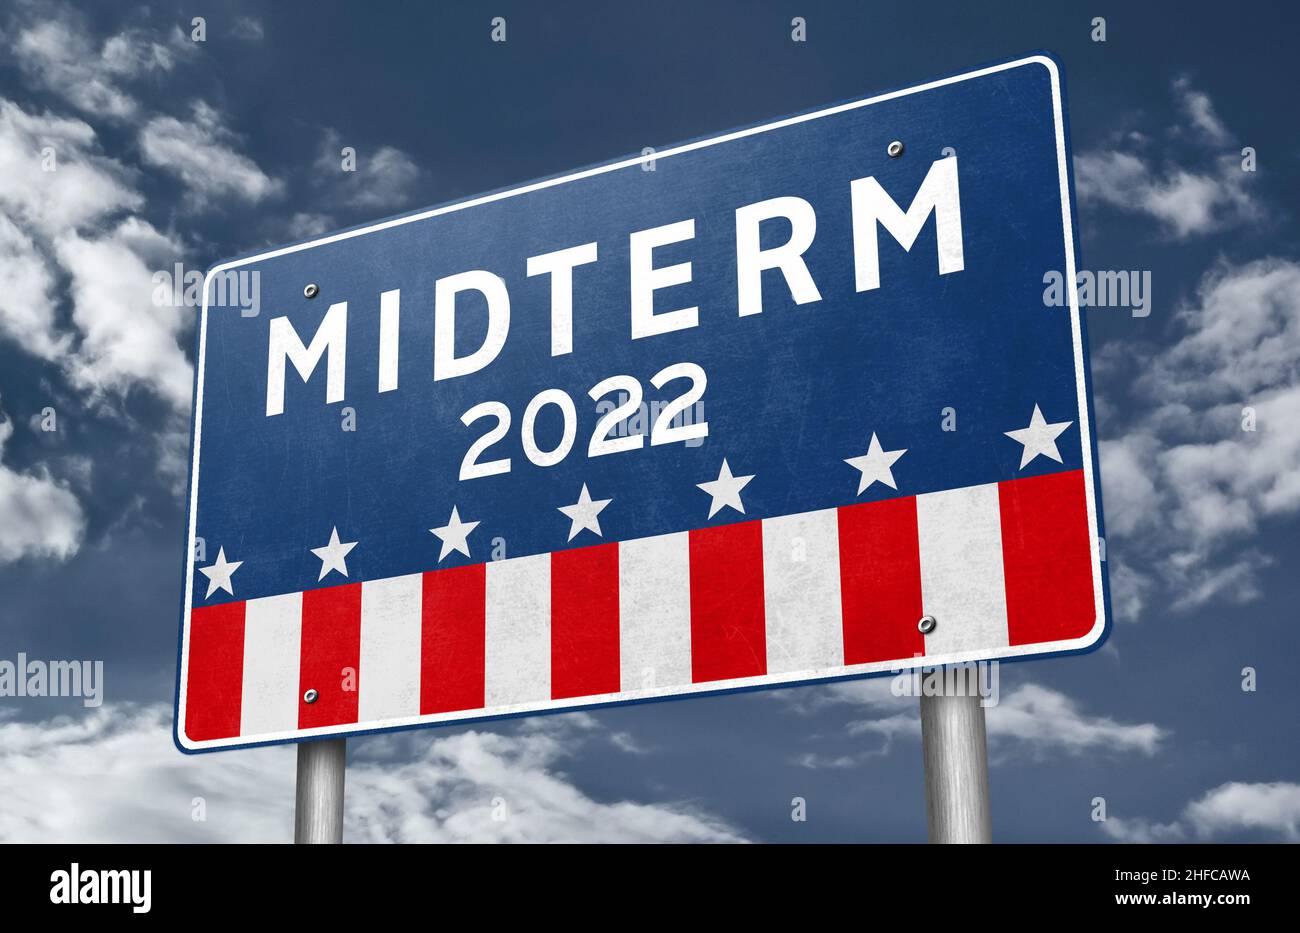 Midterm election 2022 in United States of America Stock Photo